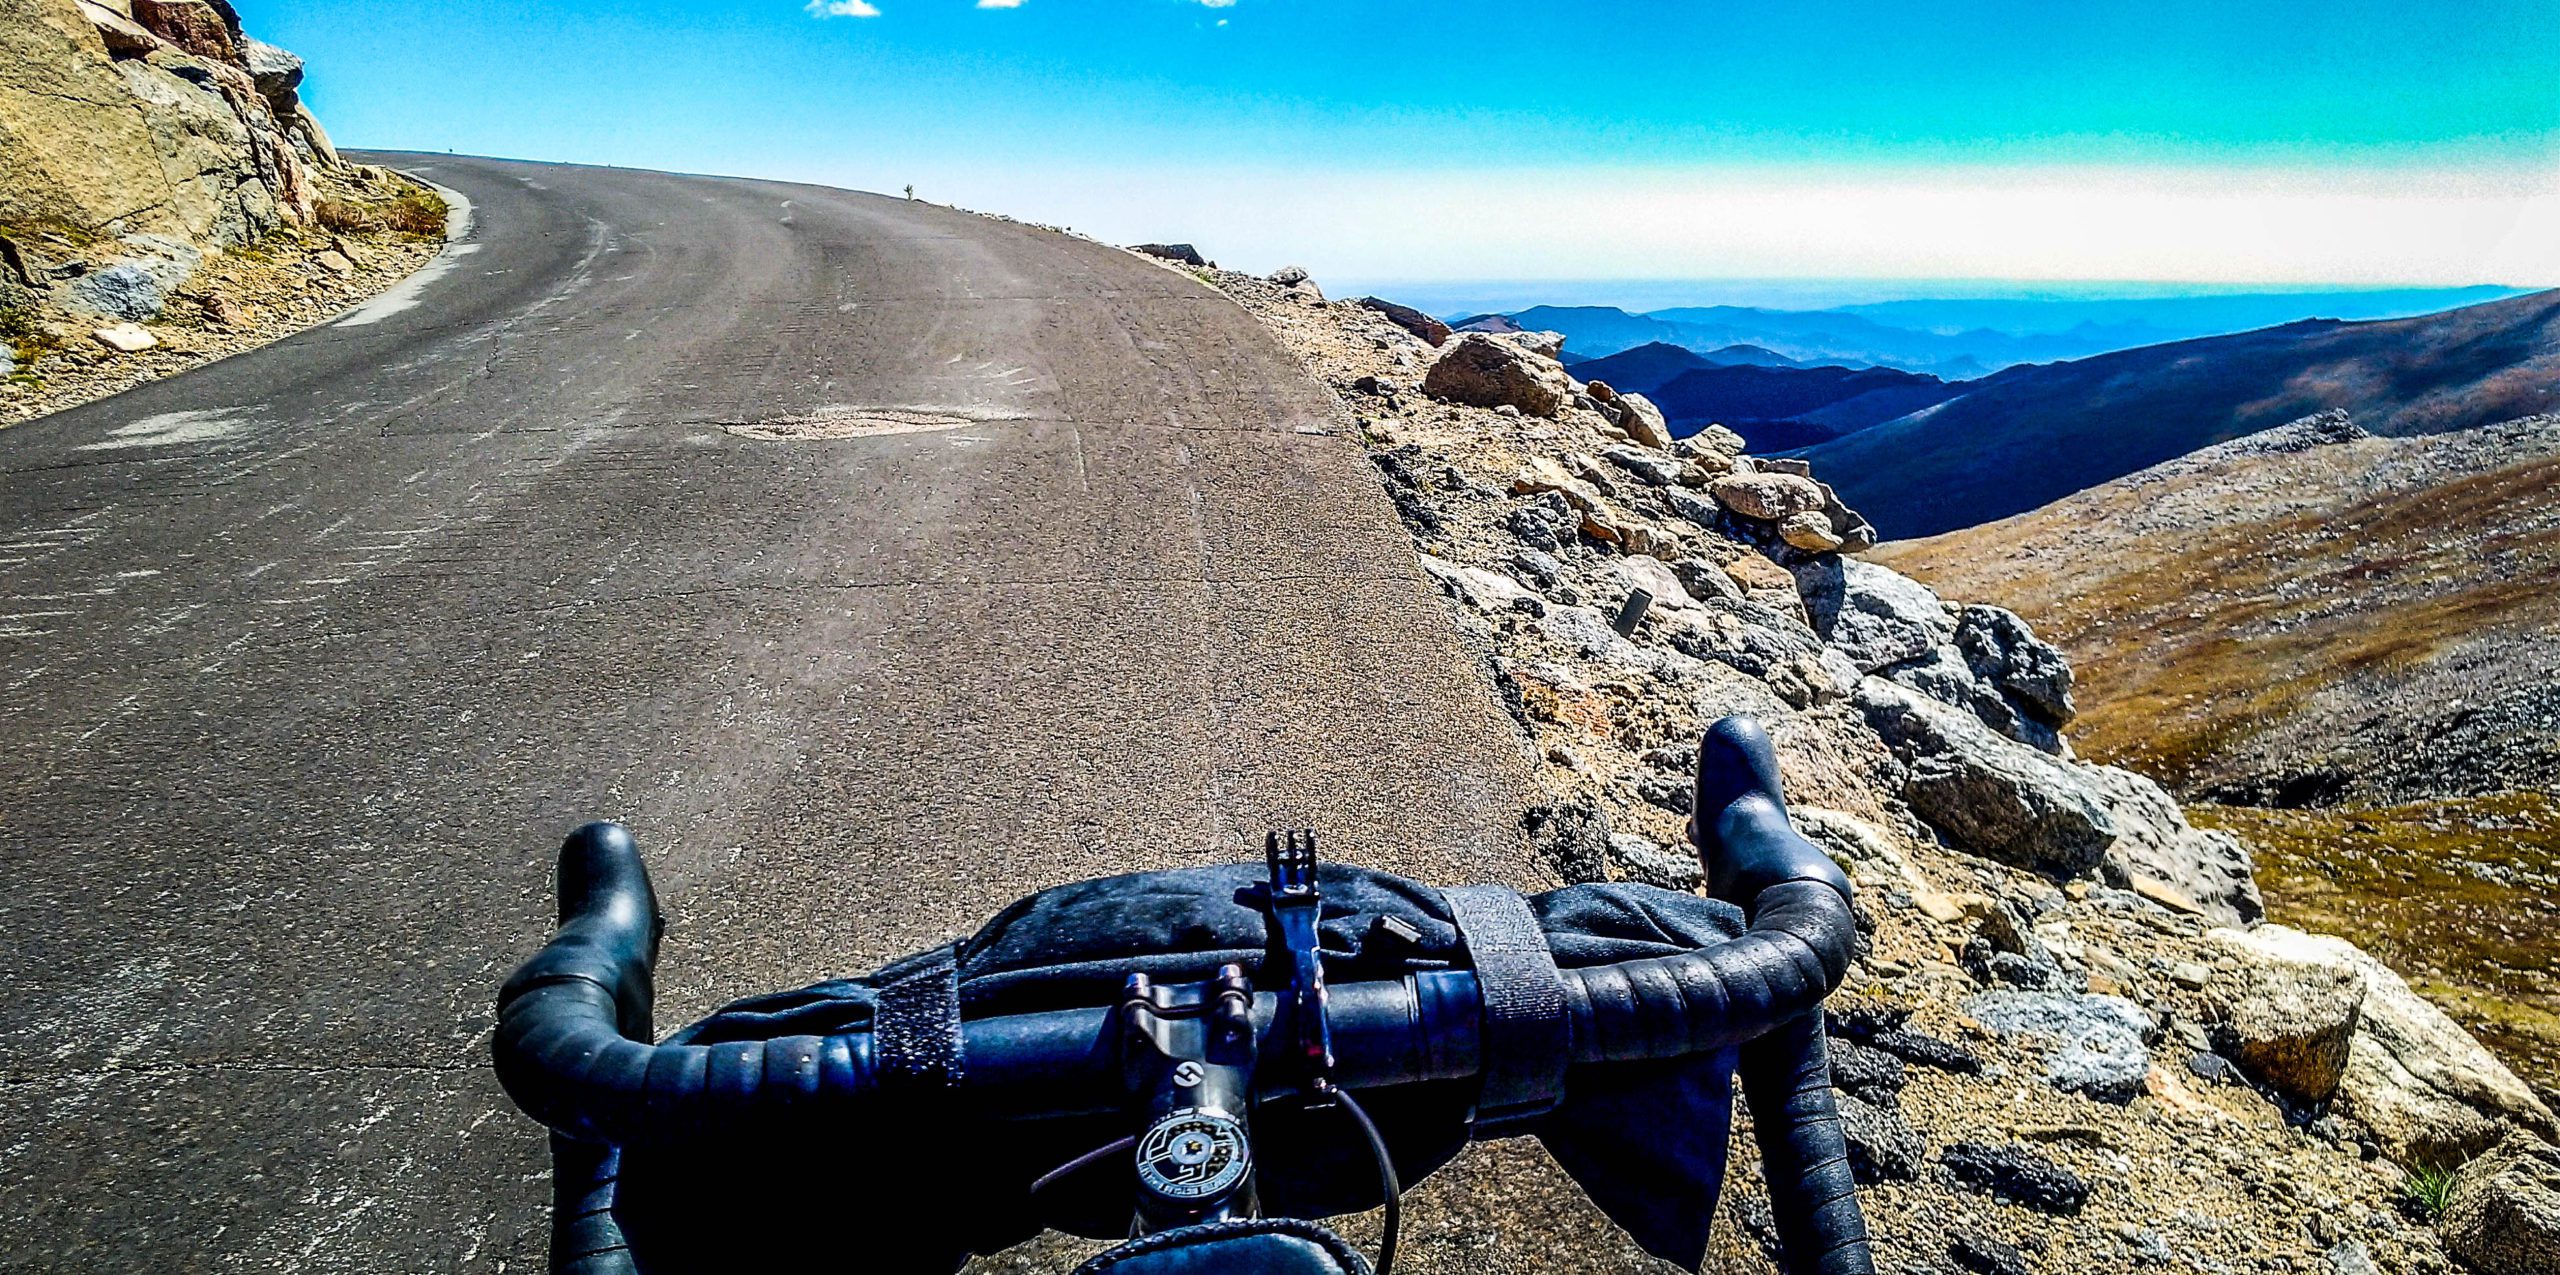 Touching the Void, Mt. Evans, Colorado